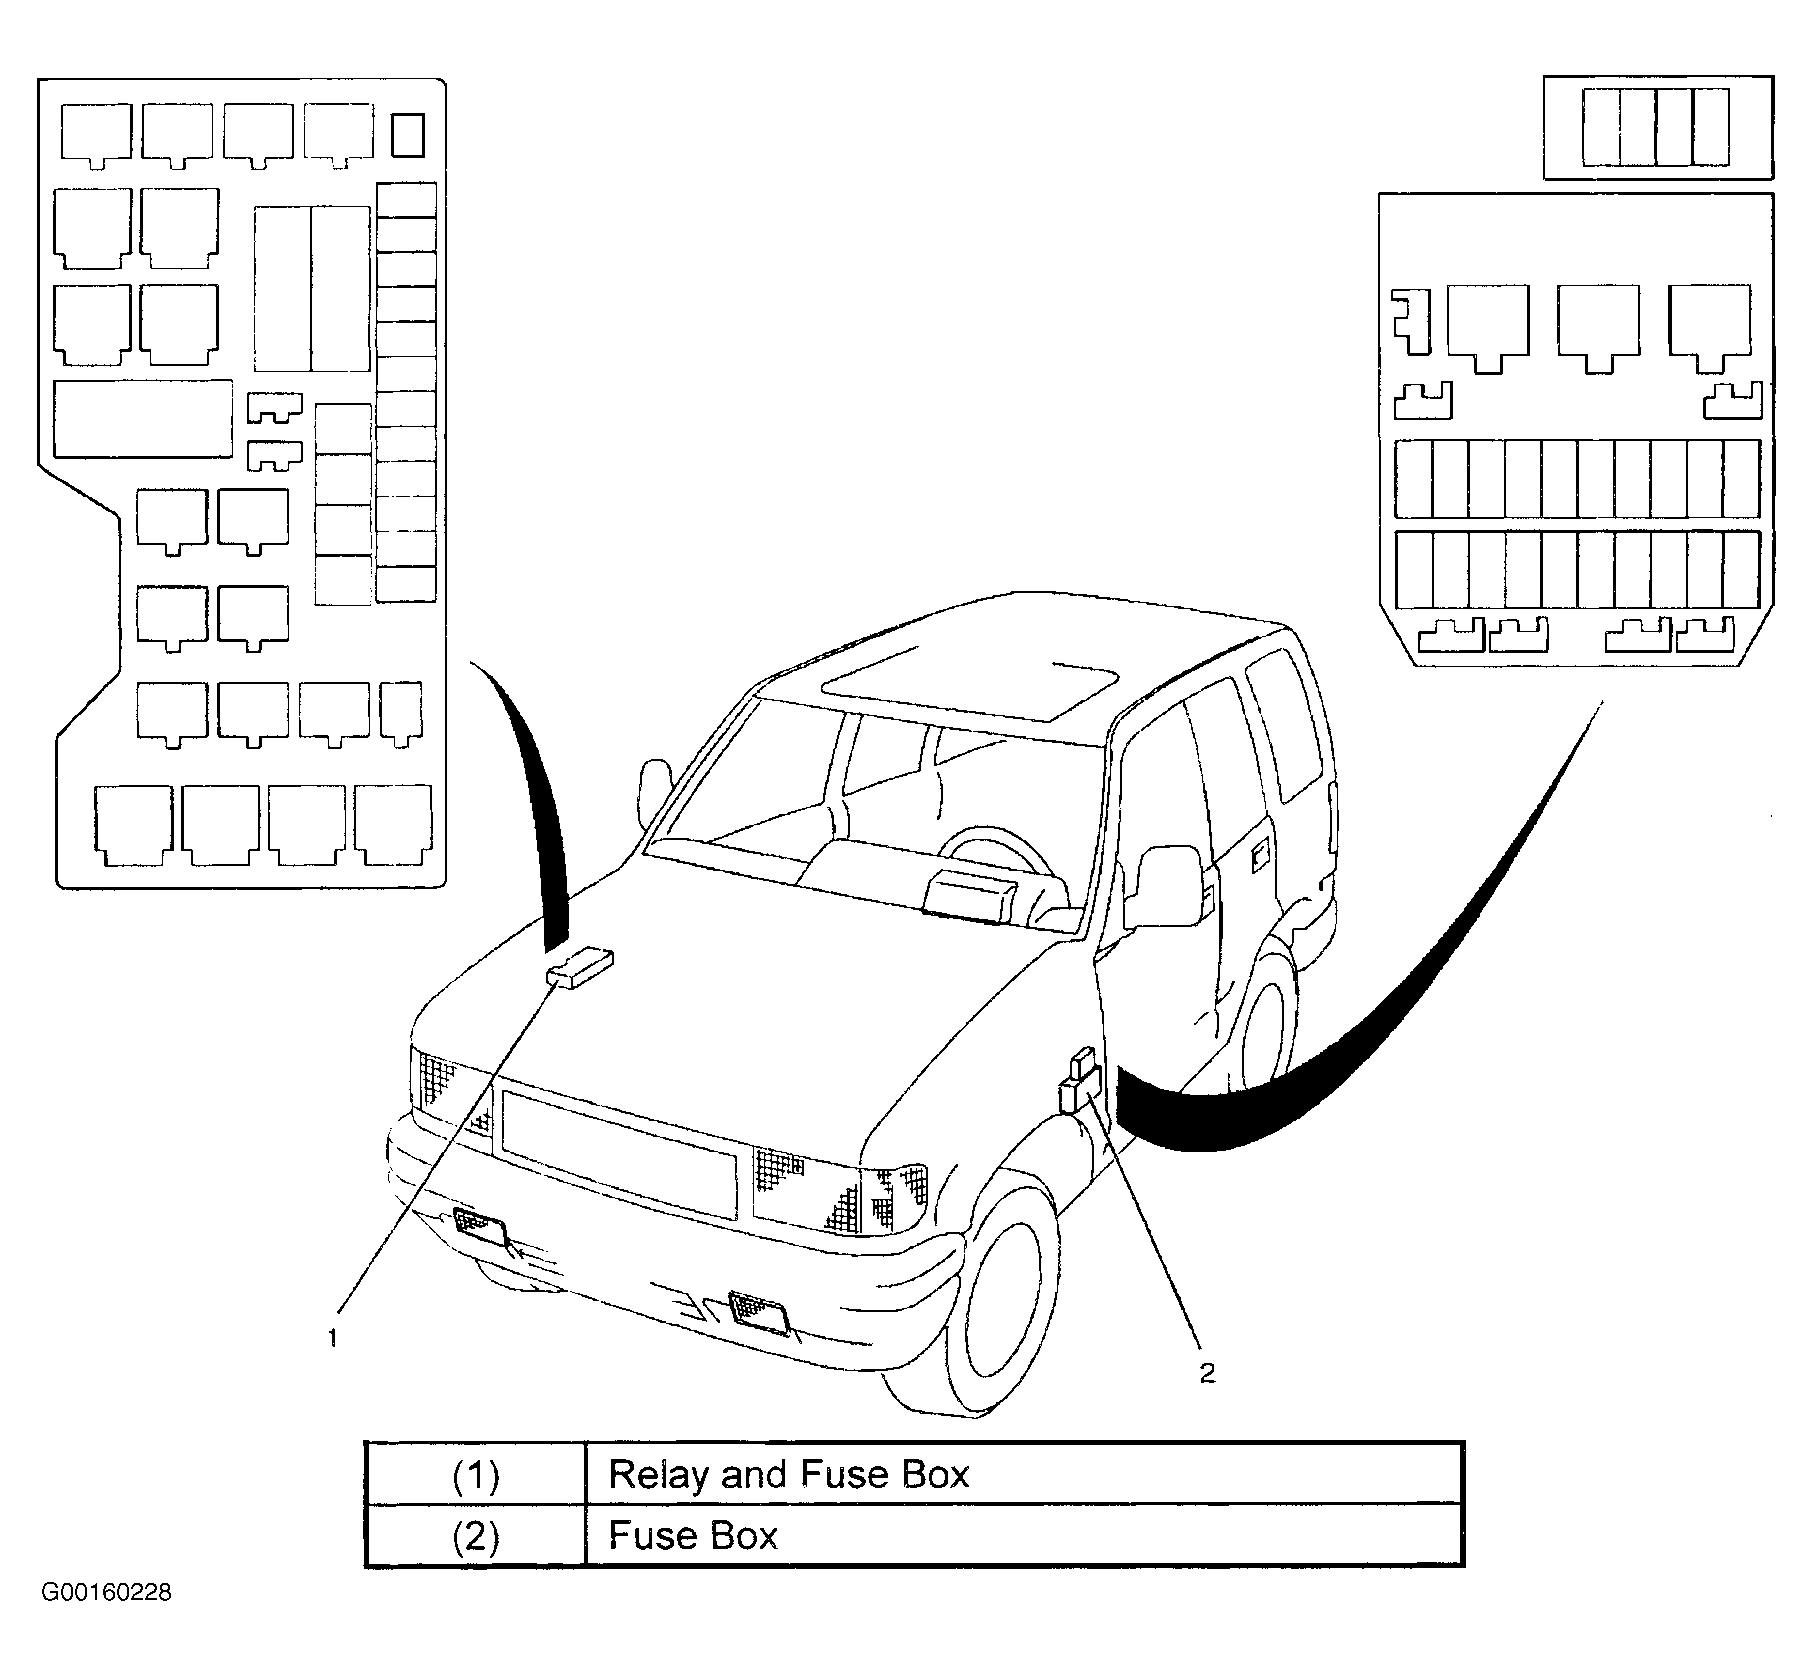 Isuzu Trooper Limited 2002 - Component Locations -  Identifying FuseBox; Relay & Fuse Box Locations